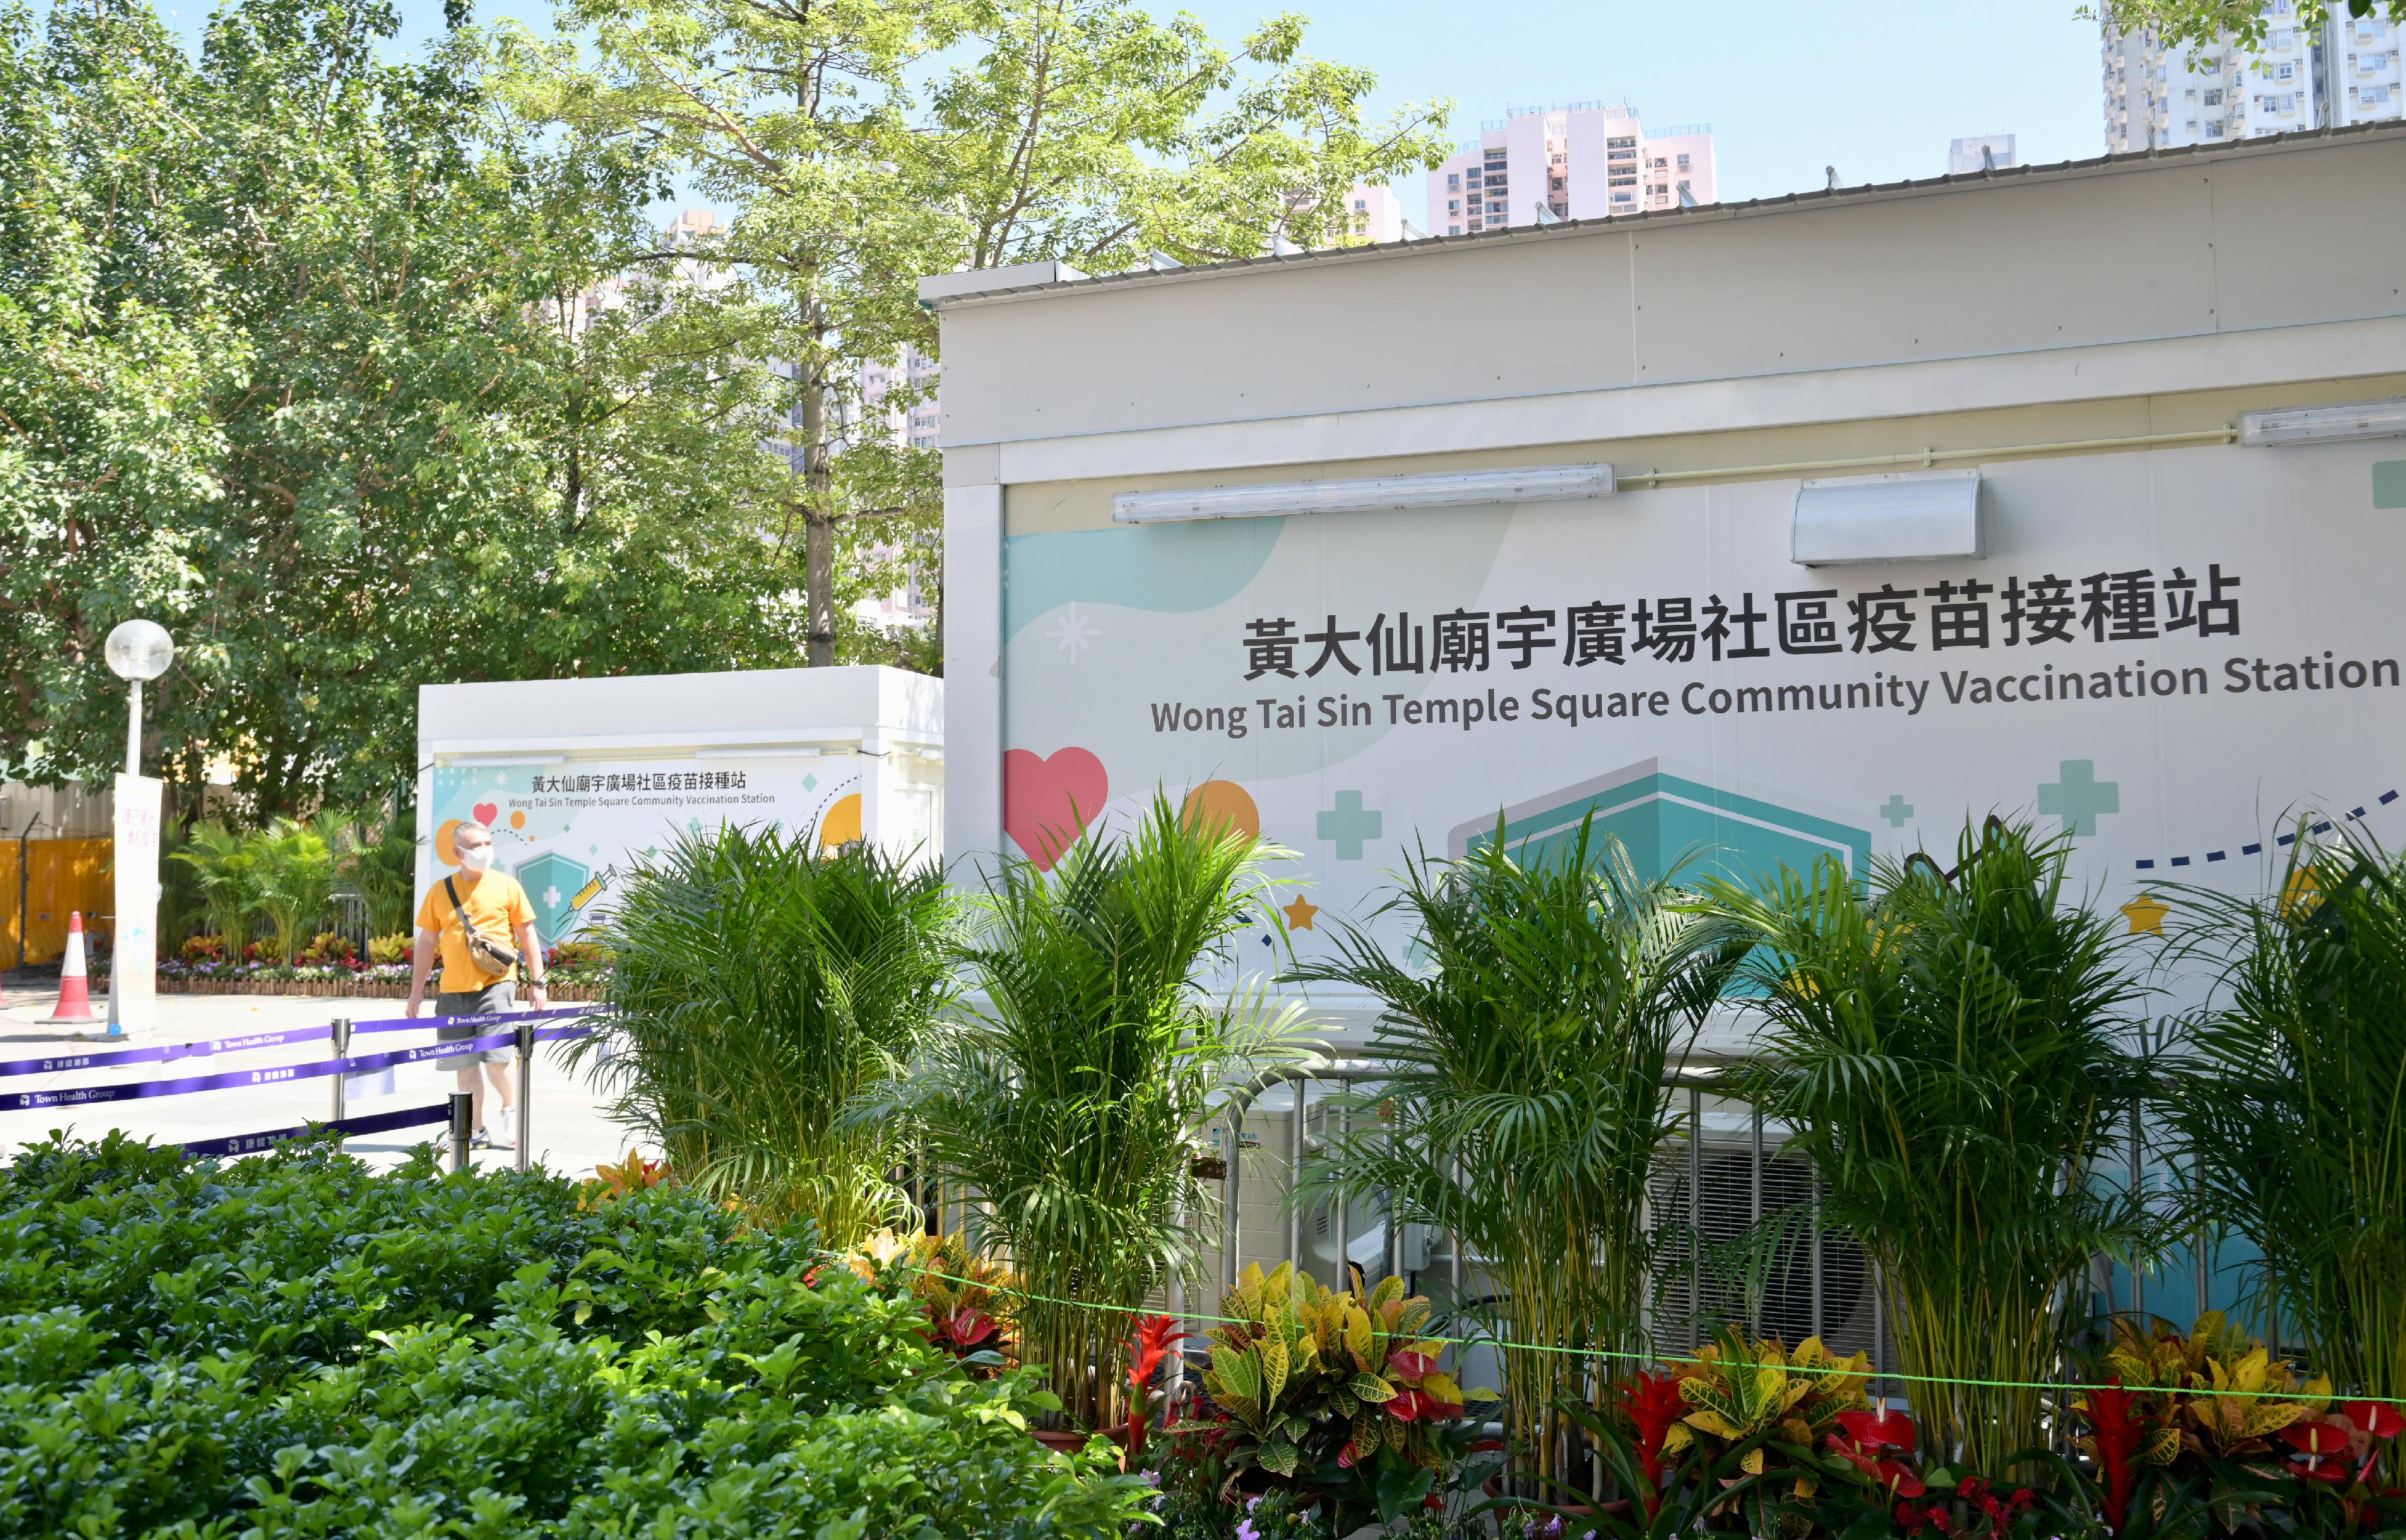 The Wong Tai Sin Temple Square Community Vaccination Station started providing service for the public today (October 12). 

